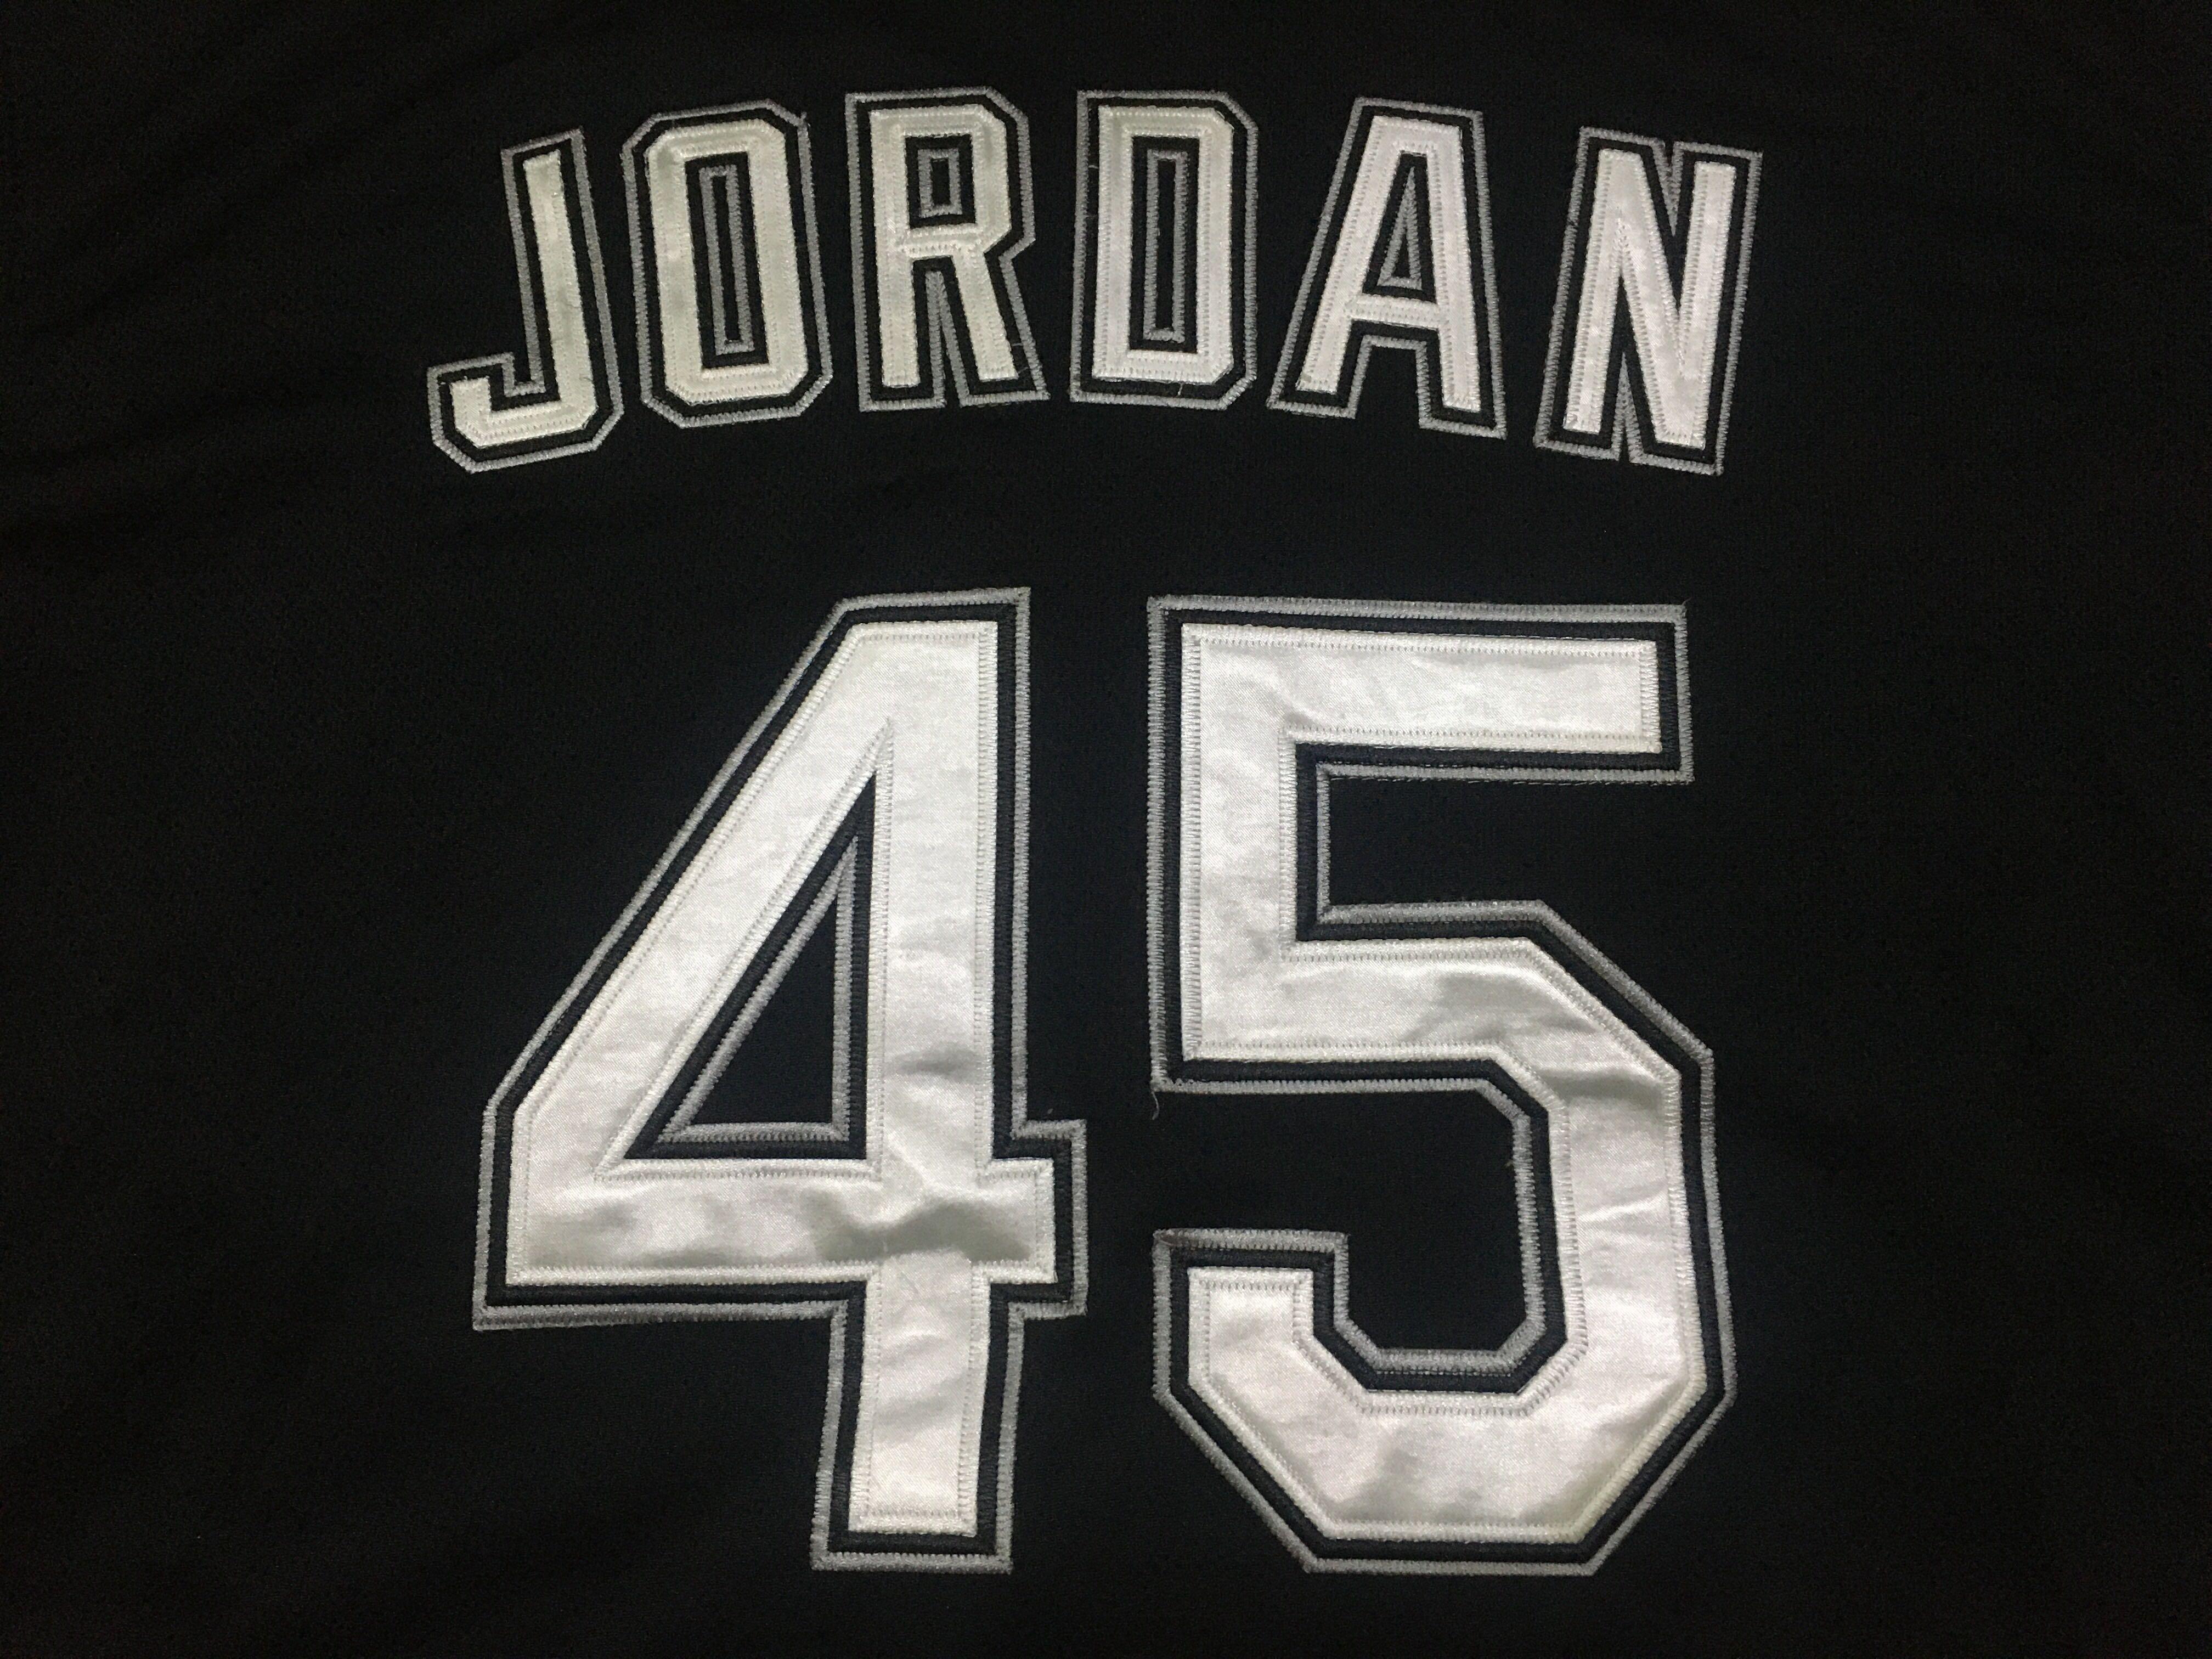 Michael Jordan #45 Chicago White Sox Majestic Jersey Size 40 Stitched  Authentic